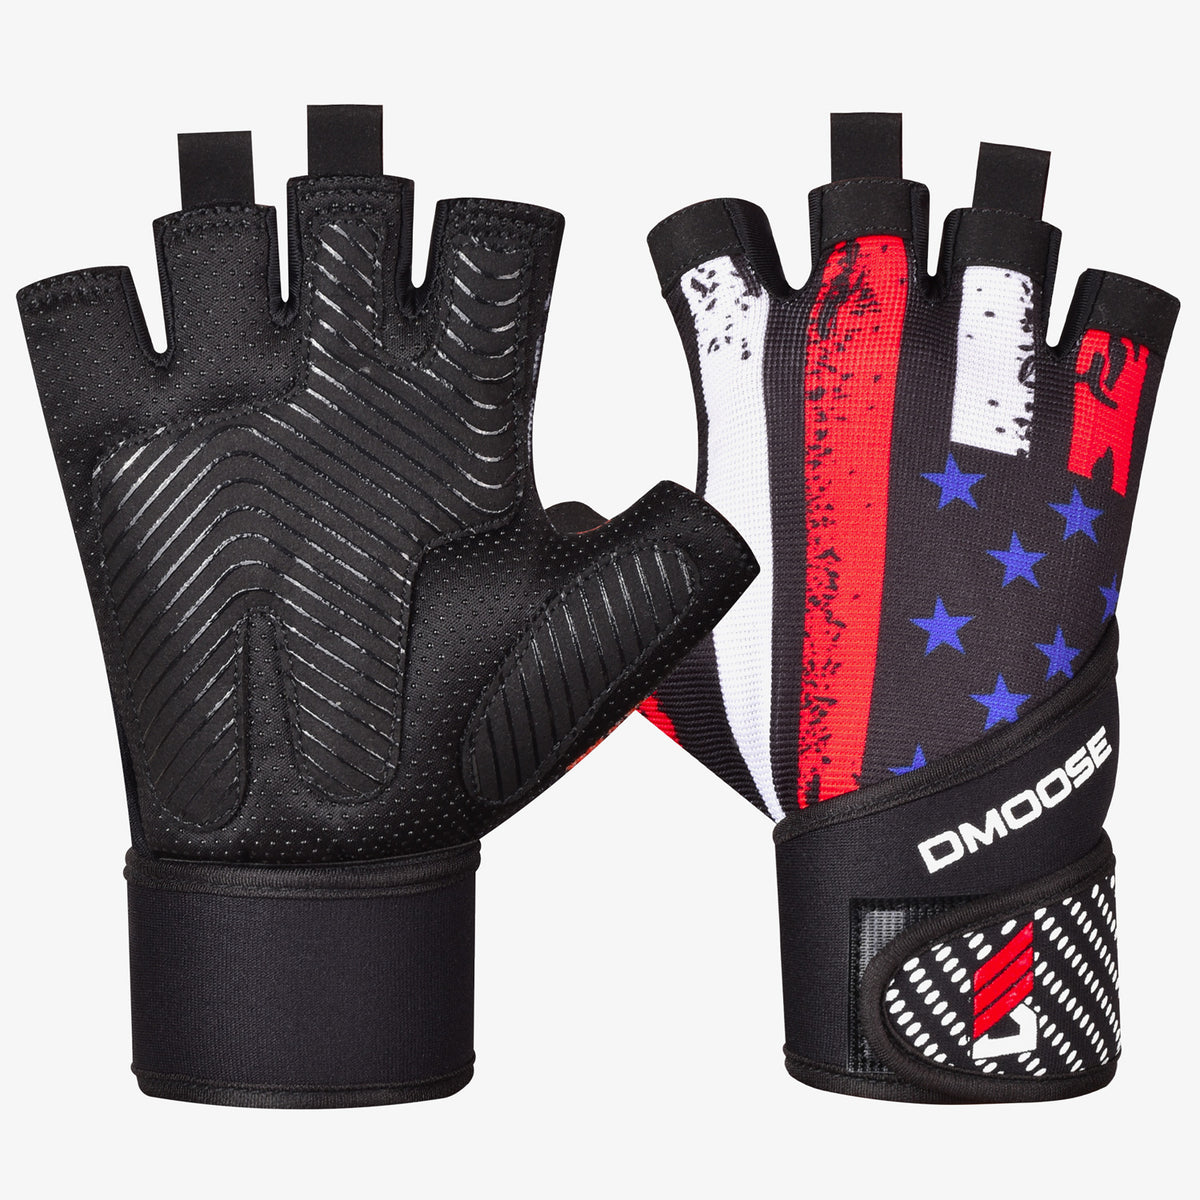 Gym Gloves X-Large Black Full Palm Protection & Extra Grip YHT Workout Gloves 